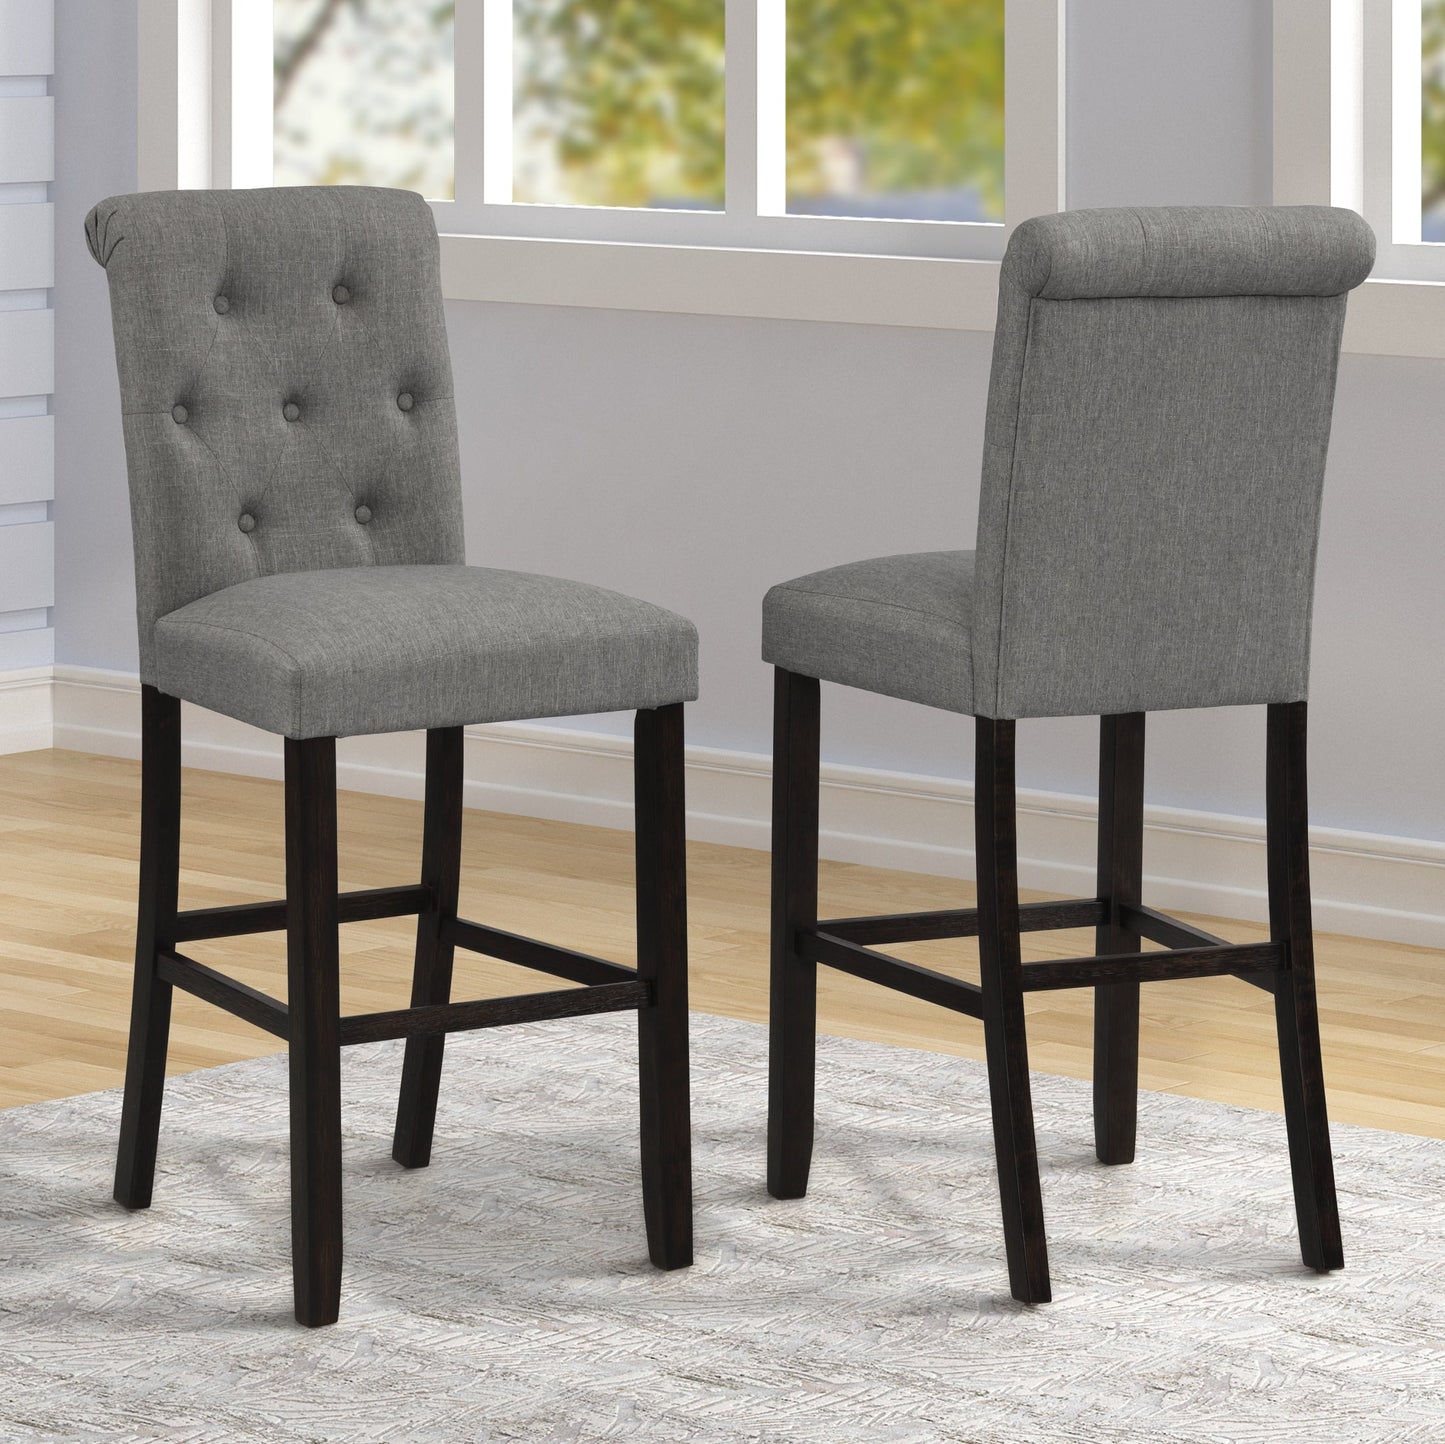 Leviton Antique Black Finished Wood 5-Piece Pub Set, Table with 4 Upholstered Barstools, Gray